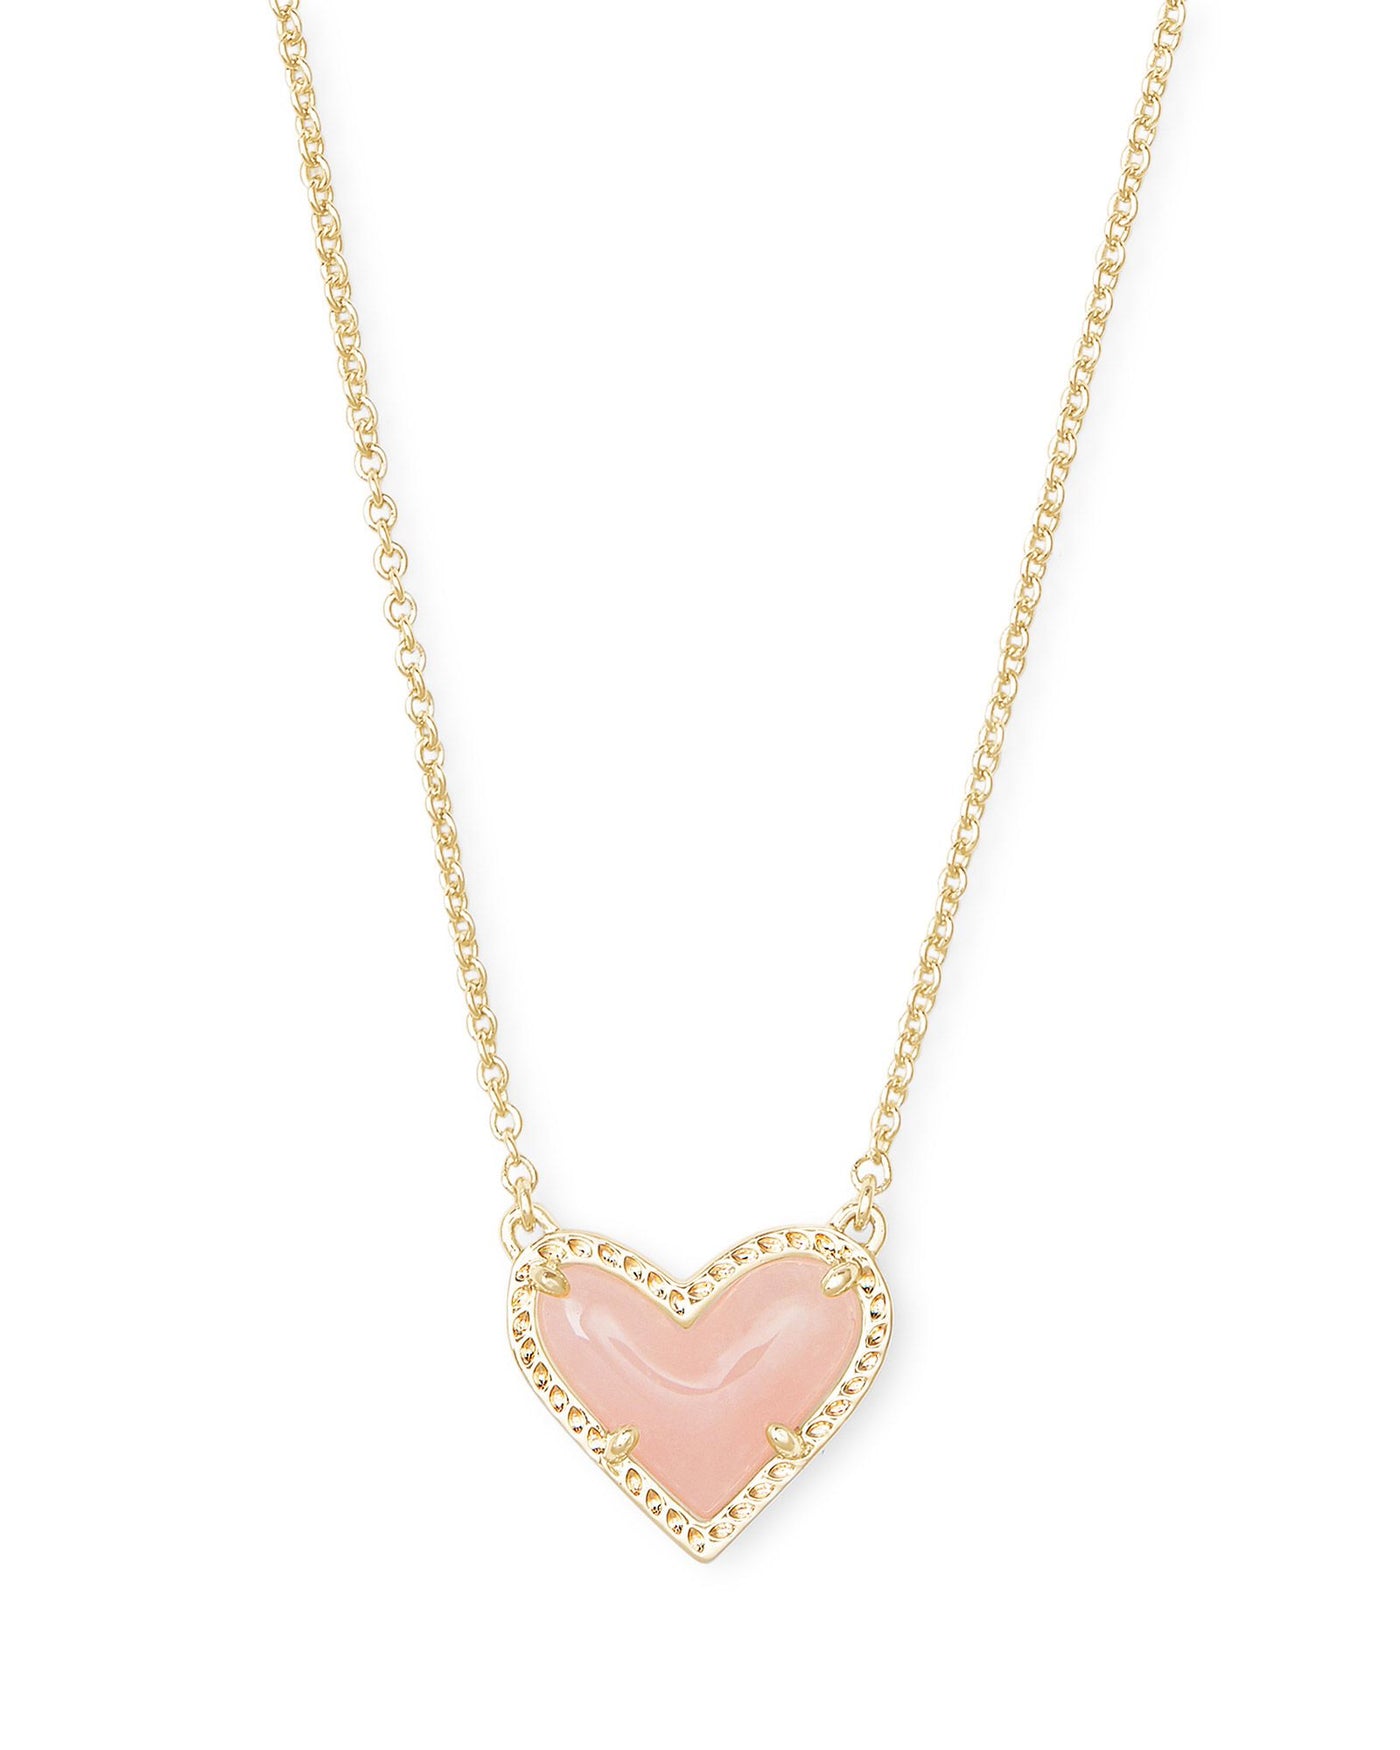 Kendra Scott Ari Heart Pendant Necklace - Gold Rose Quartz-Necklaces-Kendra Scott-Market Street Nest, Fashionable Clothing, Shoes and Home Décor Located in Mabank, TX